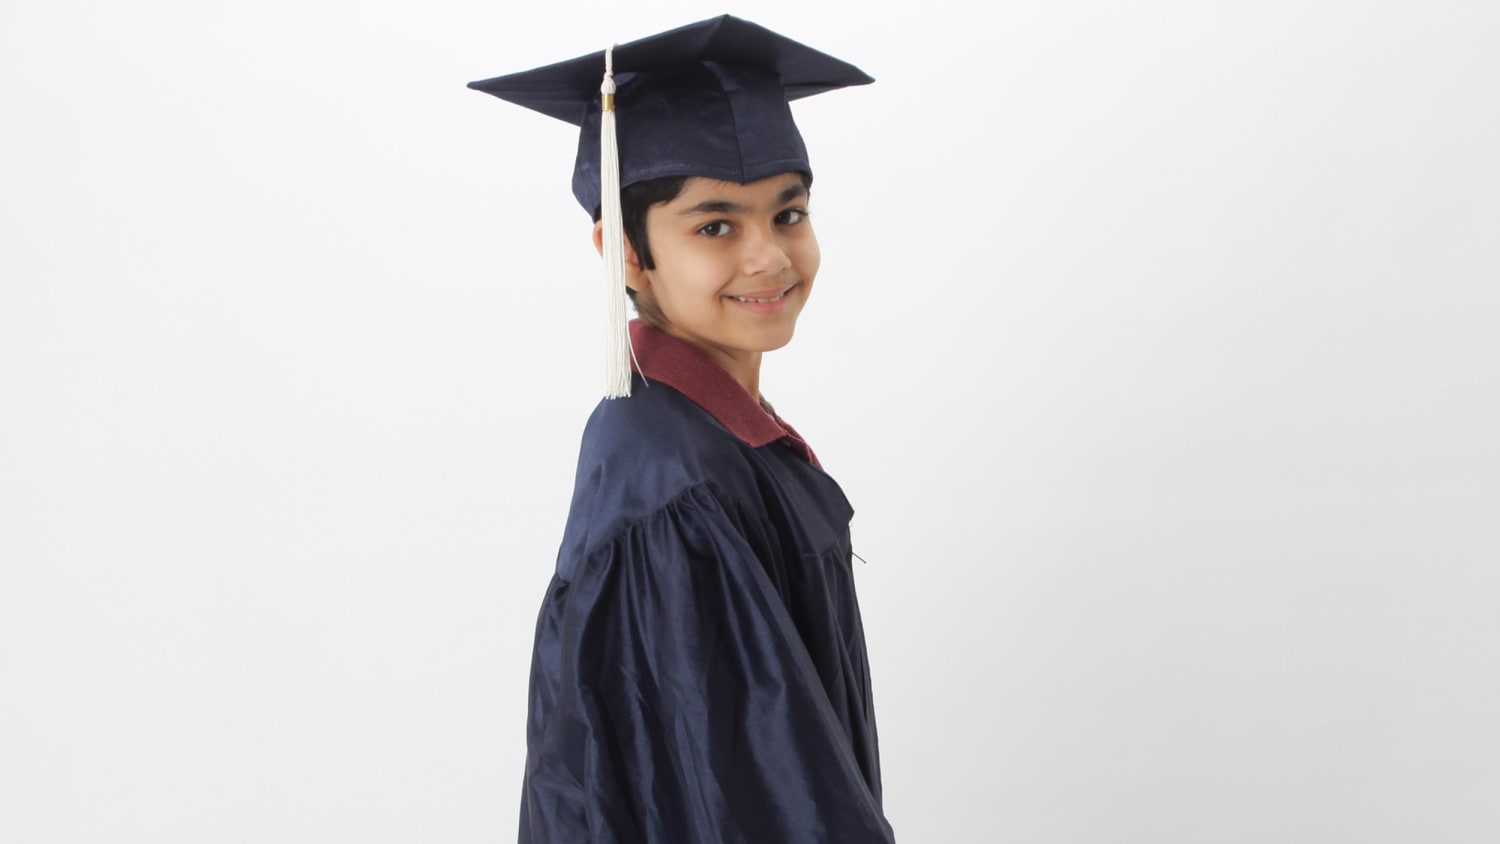 Meet the Ten-Year-Old Prodigy Who Graduated High School - Television news - NewsLocker2500 x 1407